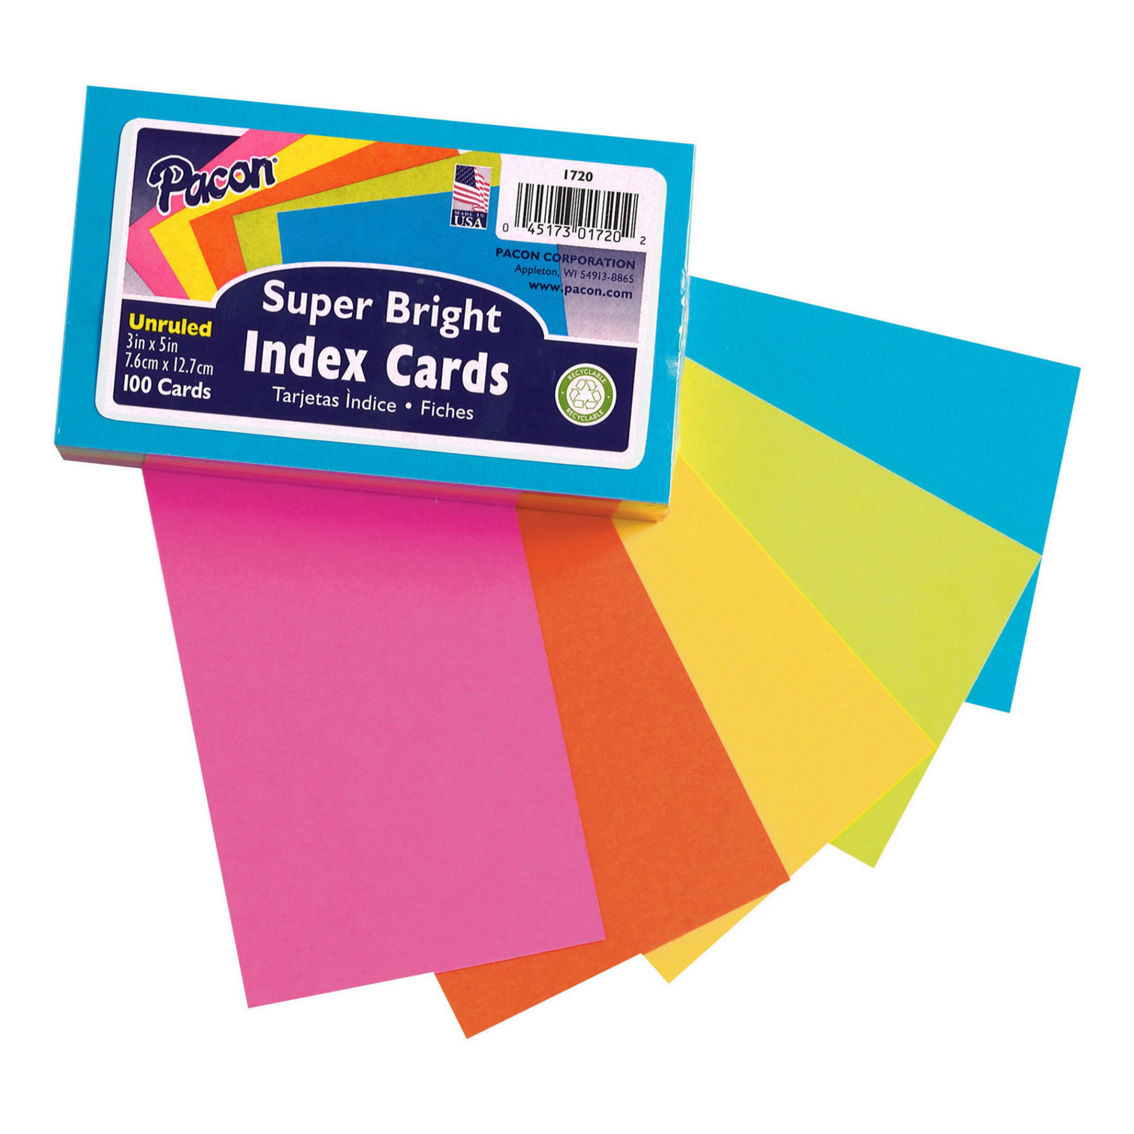 Pacon® Index Cards, 5 Super Bright Assorted Colors, 100 Cards Per Pack, 6 Packs - Image 2 of 2